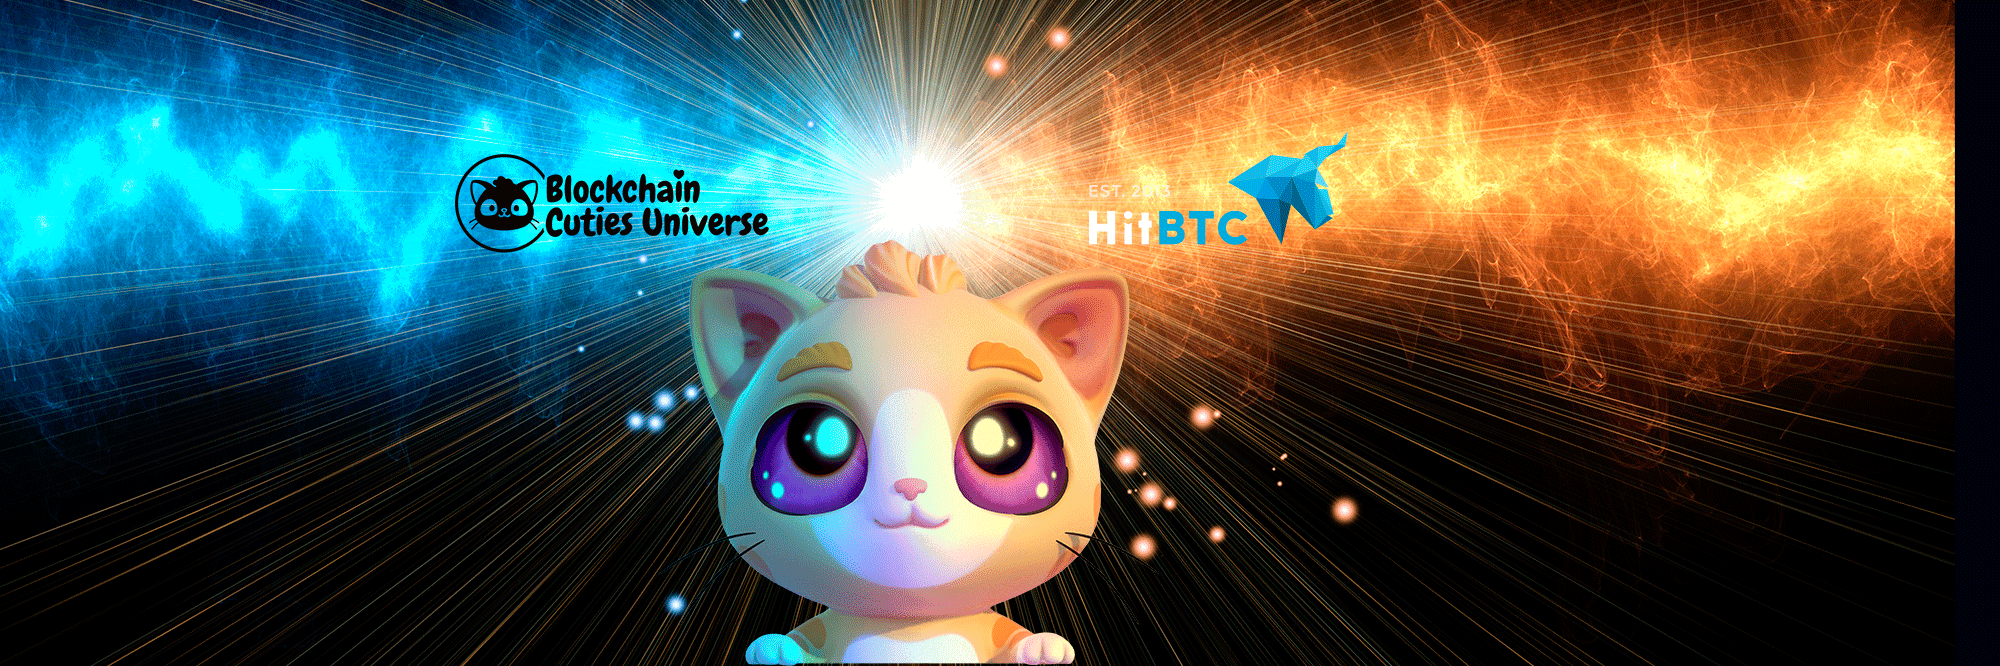 BlockchainCuties HitBTCexchange crypto games blockchaingames Bountyblok has replaced its centralized randomizer service, and integrated Chainlink VRF and Price Feeds on the Polygon Mainnet for their distribution tools and giveaways. 